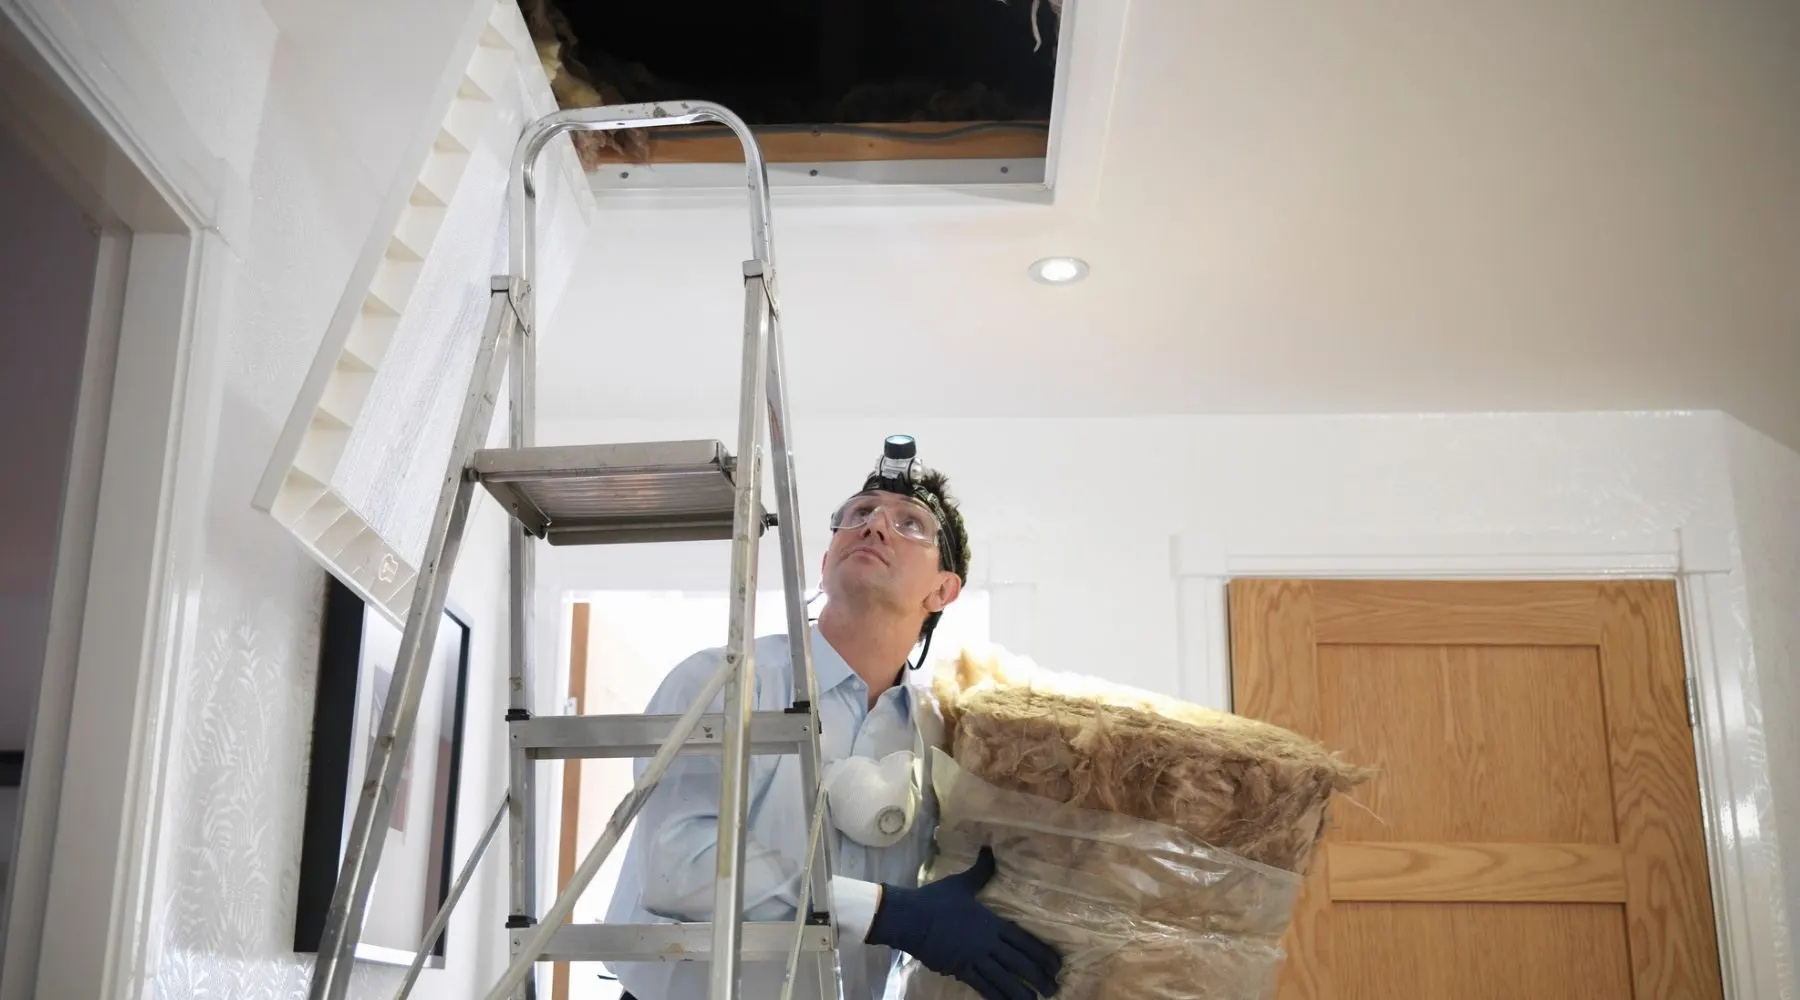 A man installs insulated batting in an attic.